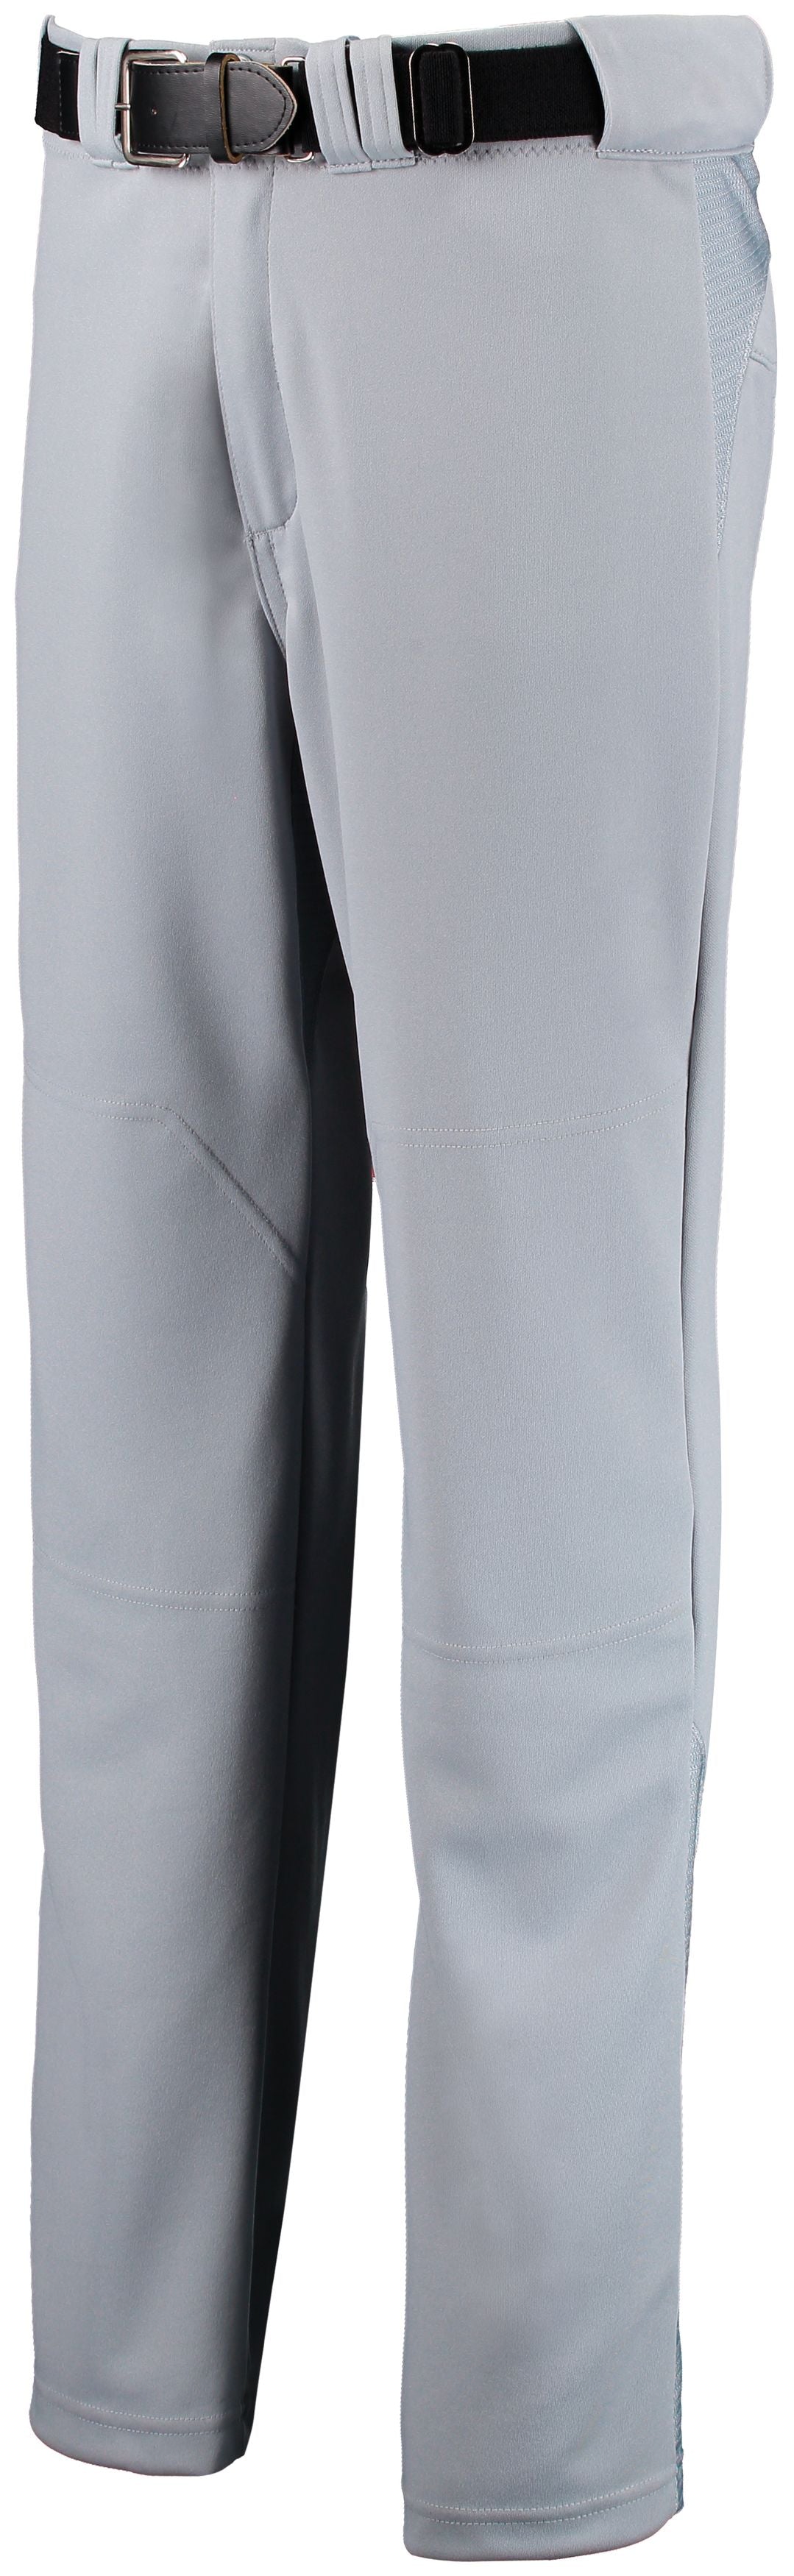 Russell Athletic Diamond Fit Series Pant in Baseball Grey  -Part of the Adult, Adult-Pants, Pants, Baseball, Russell-Athletic-Products, All-Sports, All-Sports-1 product lines at KanaleyCreations.com